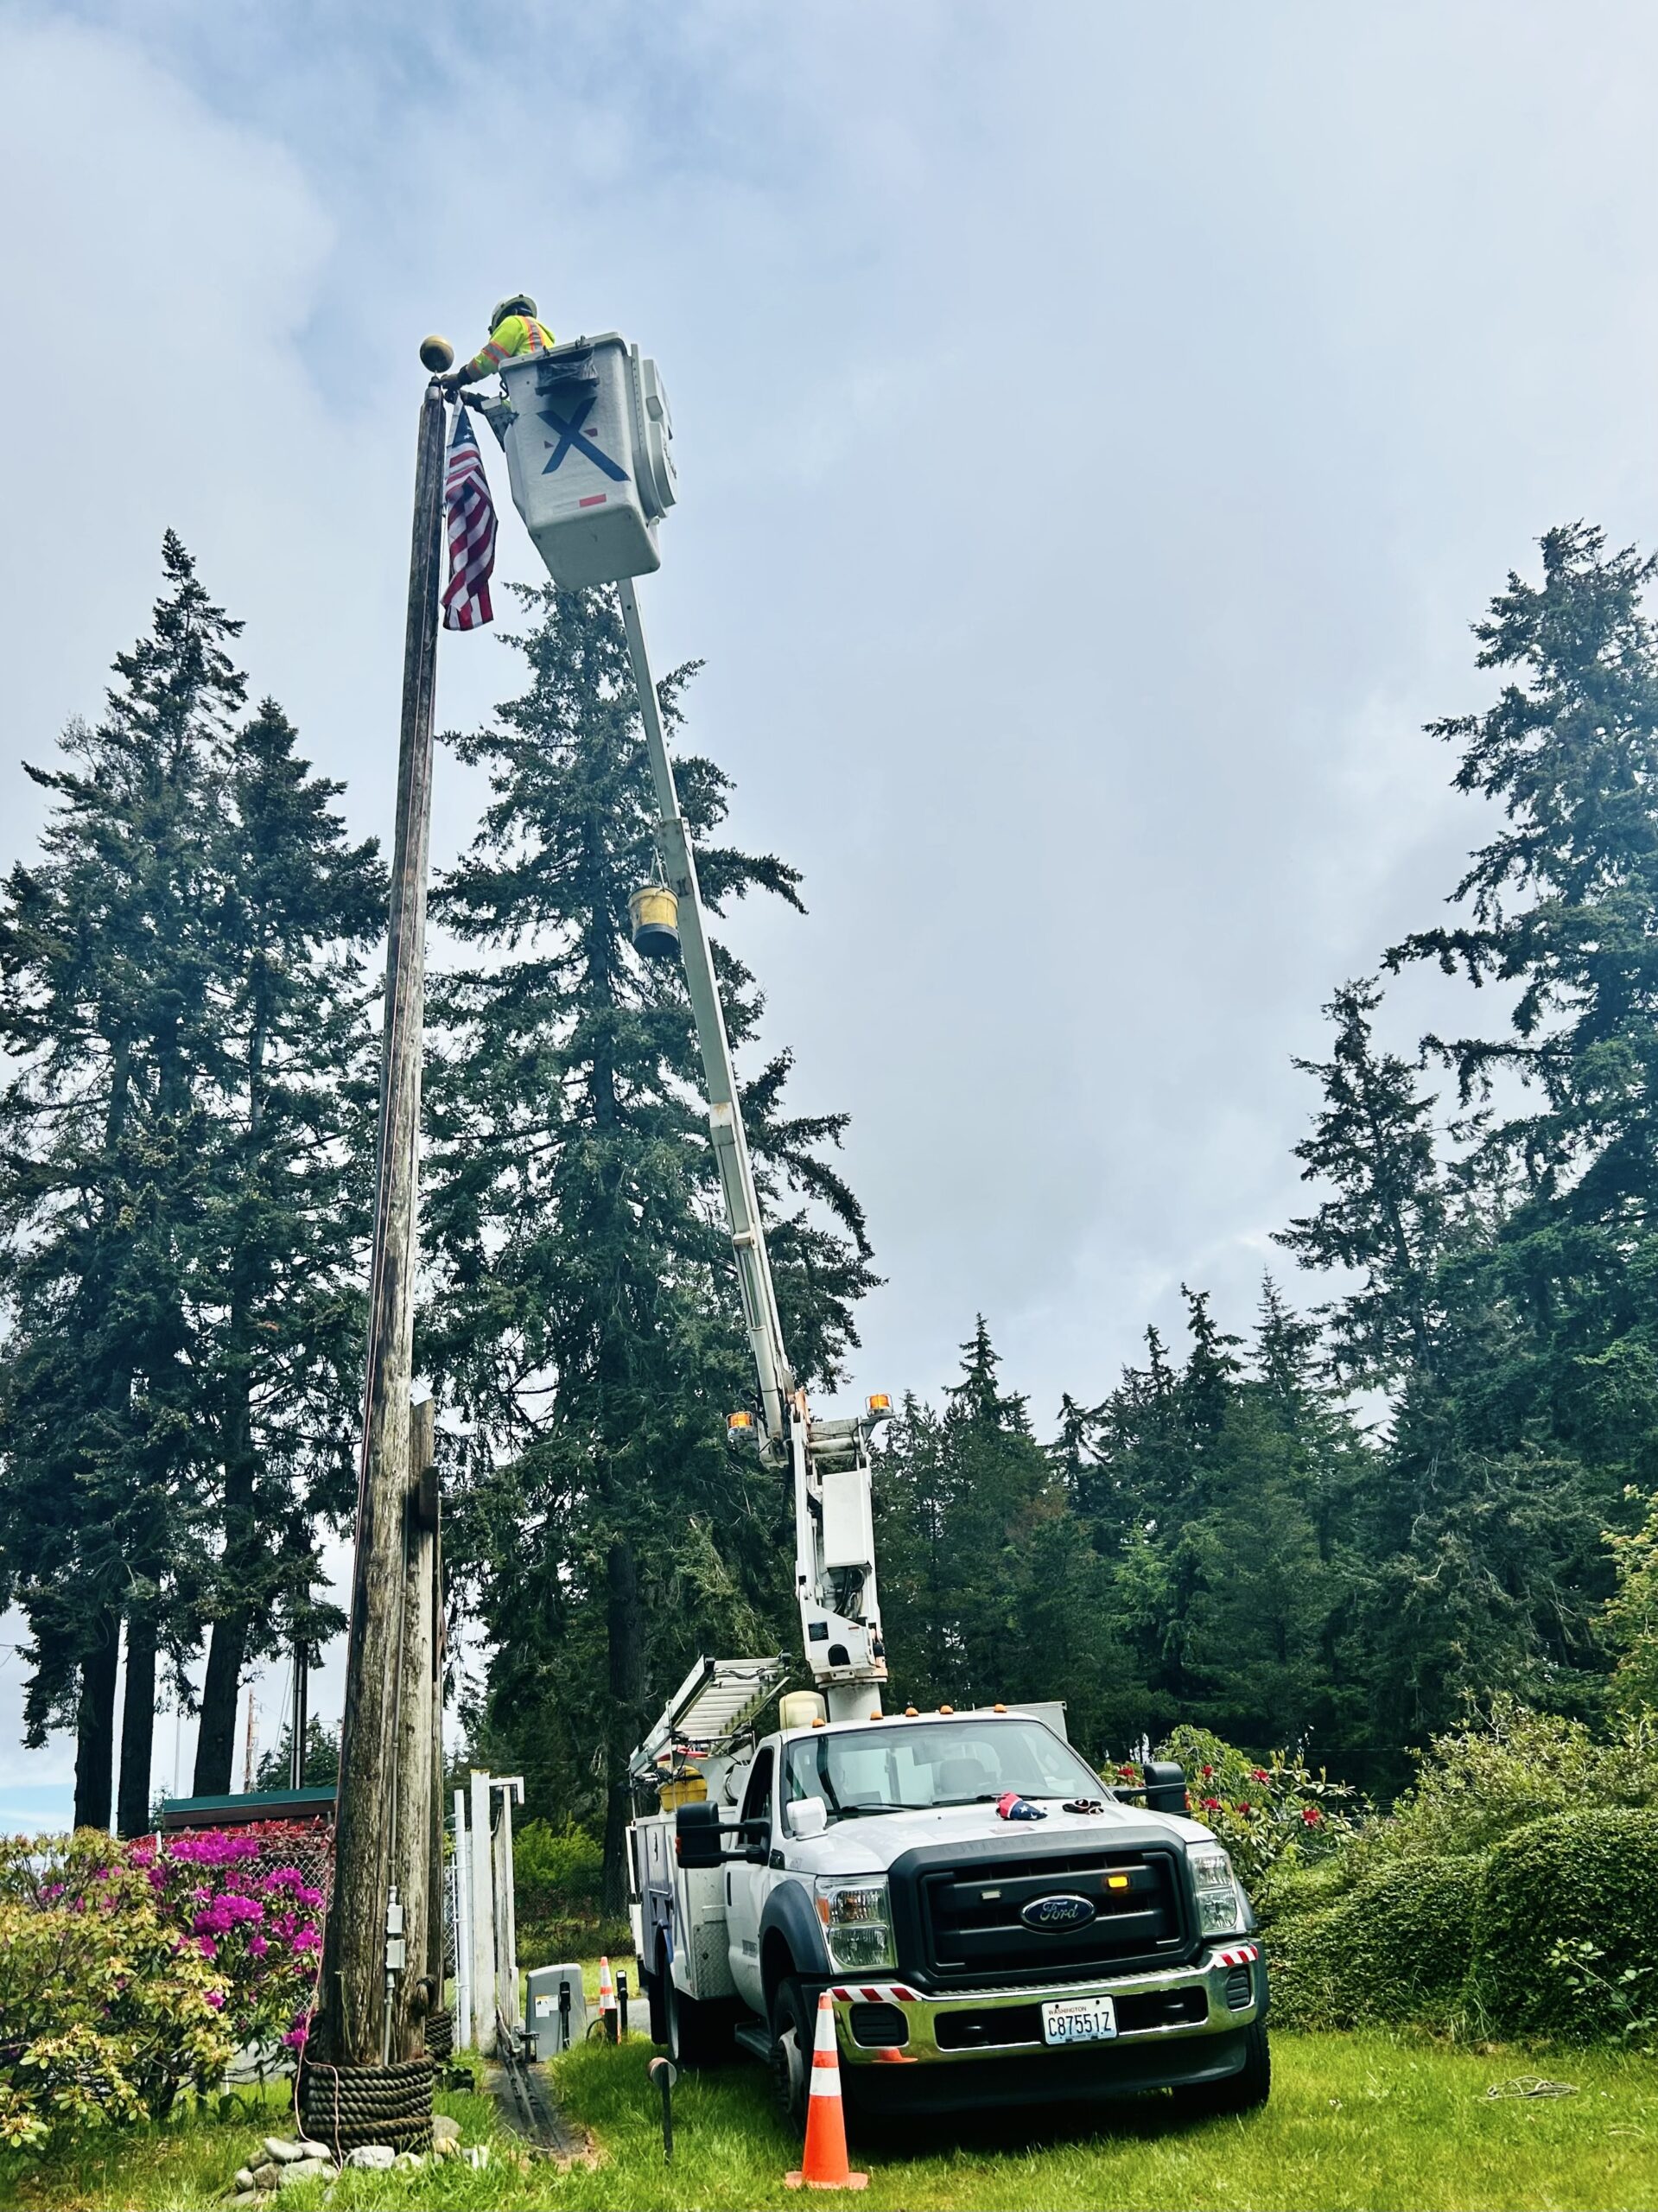 Comcast Technicians Bring Operation Old Glory Flag Replacement Program to Whidbey Island